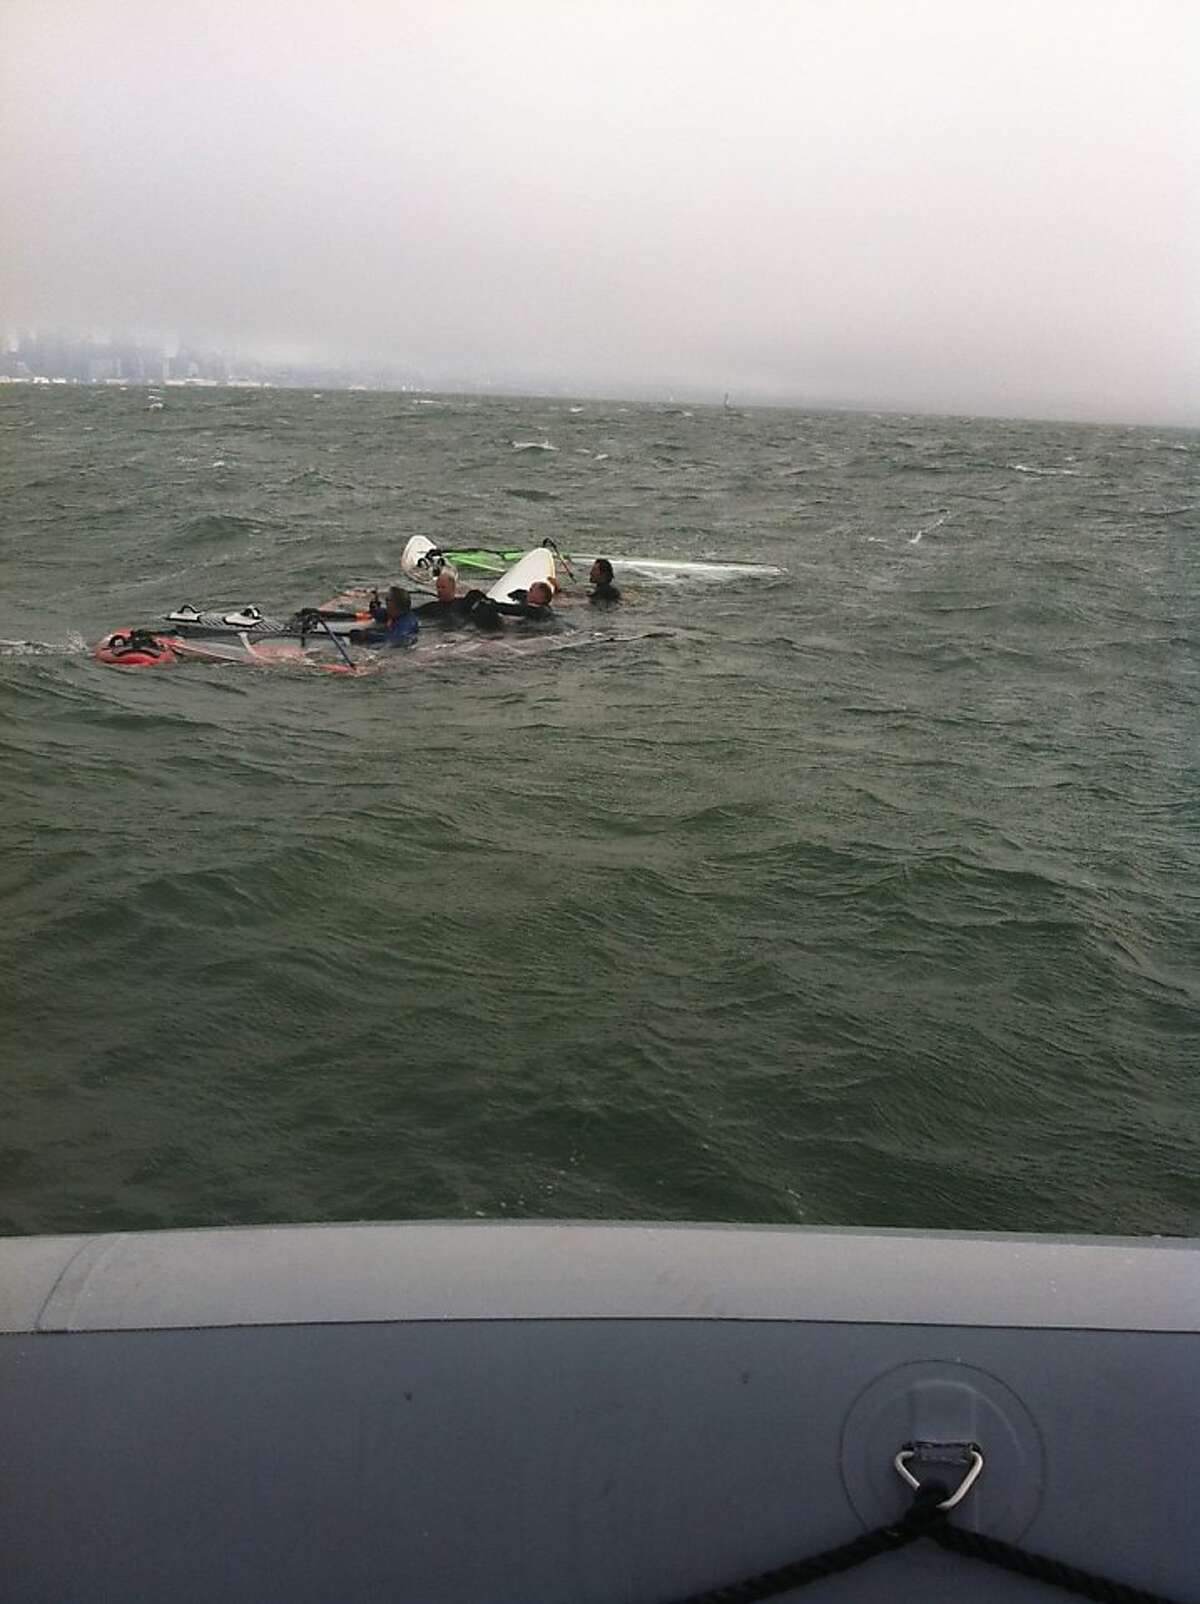 A group of windsurfers discovered and rescued a dog swimming in the bay Monday night, August 12, 2013.